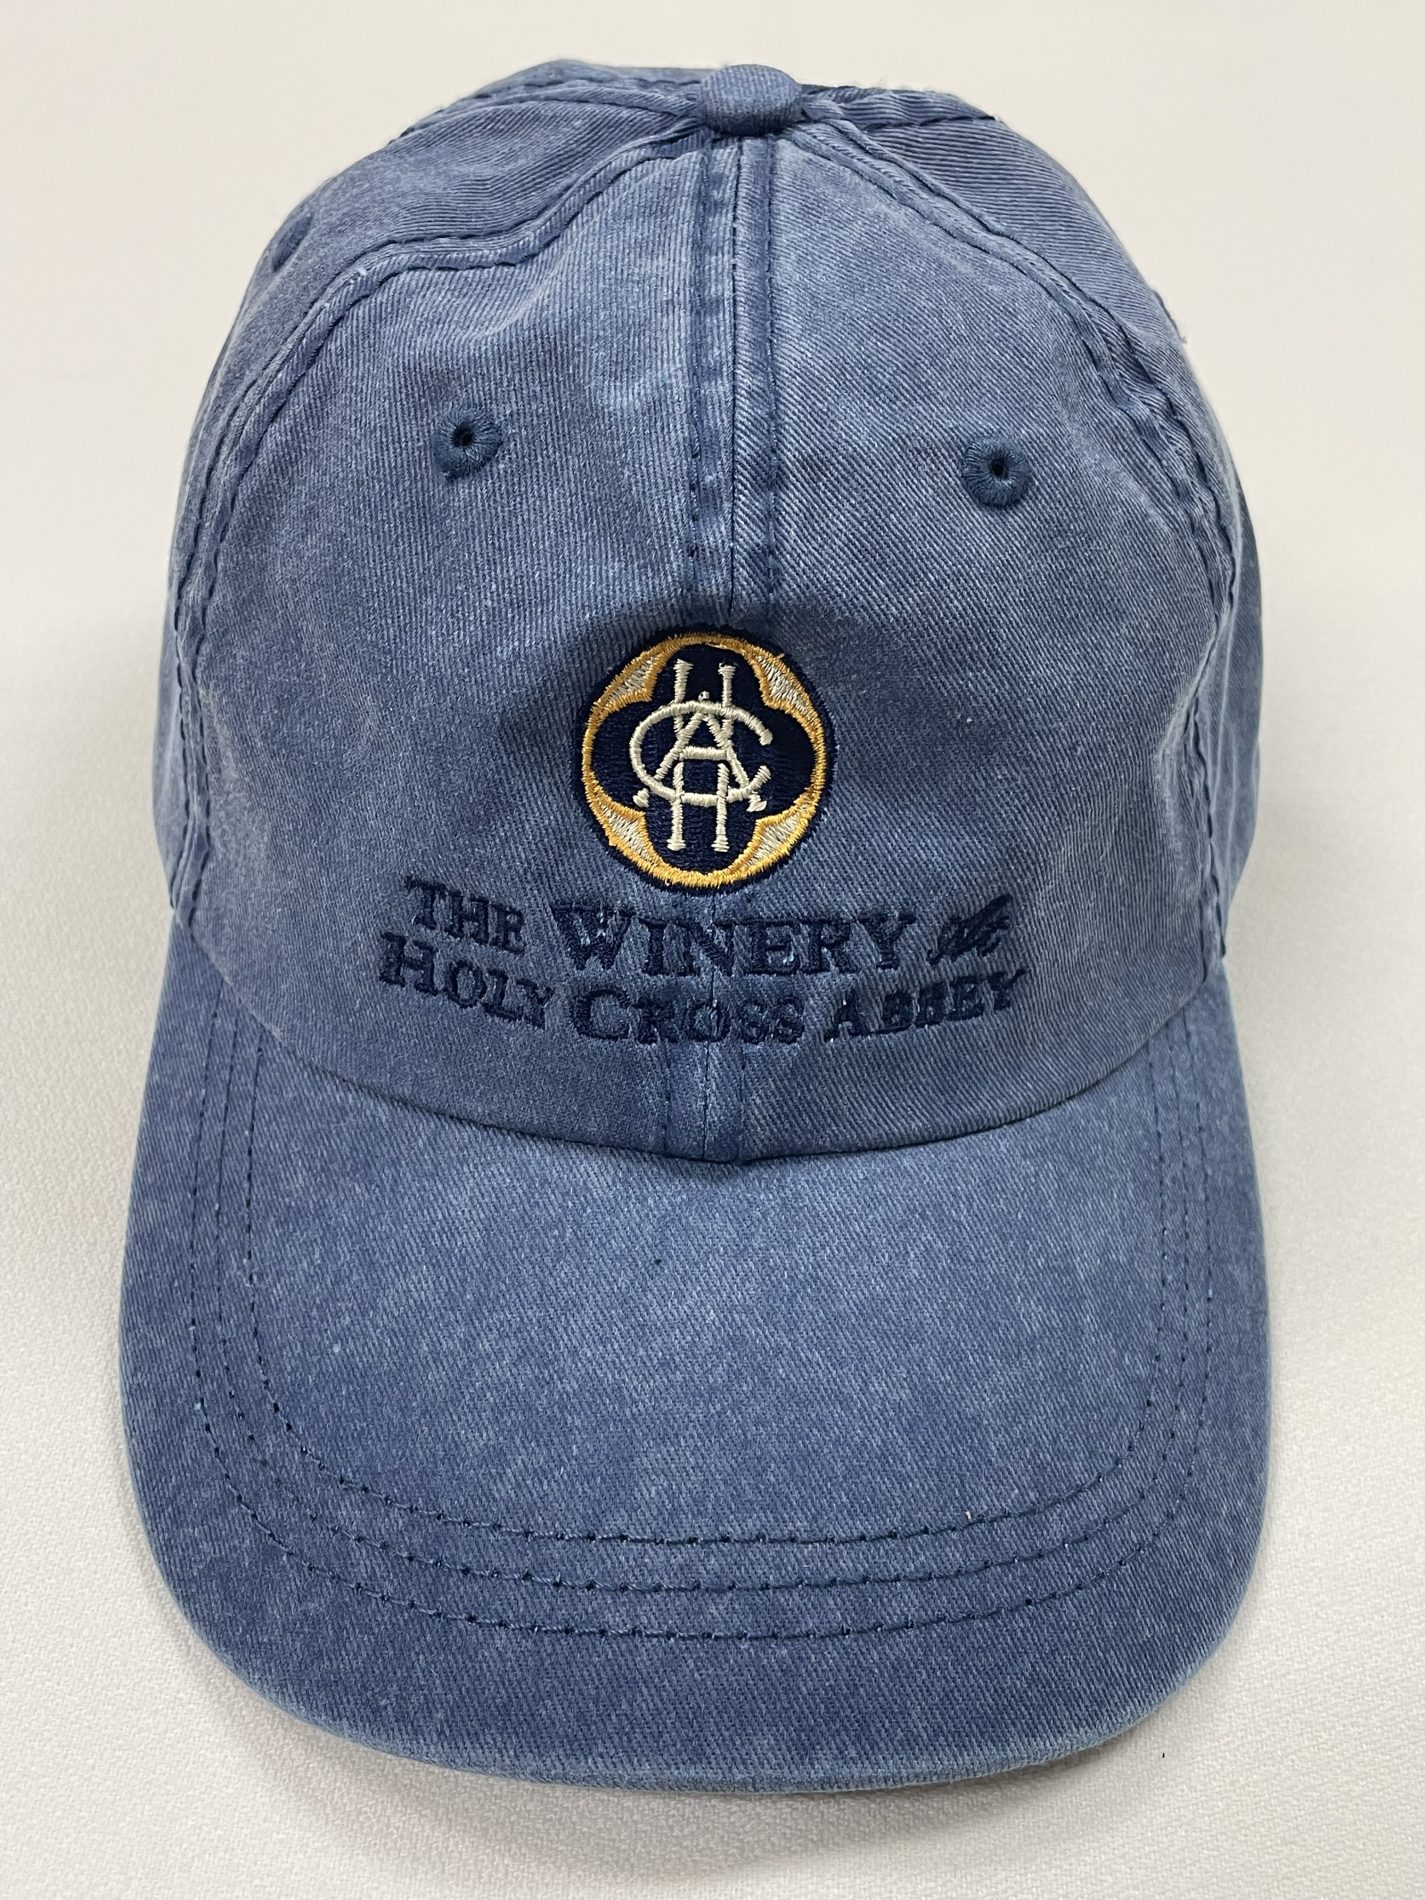 Abbey Winery Cap - Colorado Wine, Colorado Winery - The Winery at Holy ...